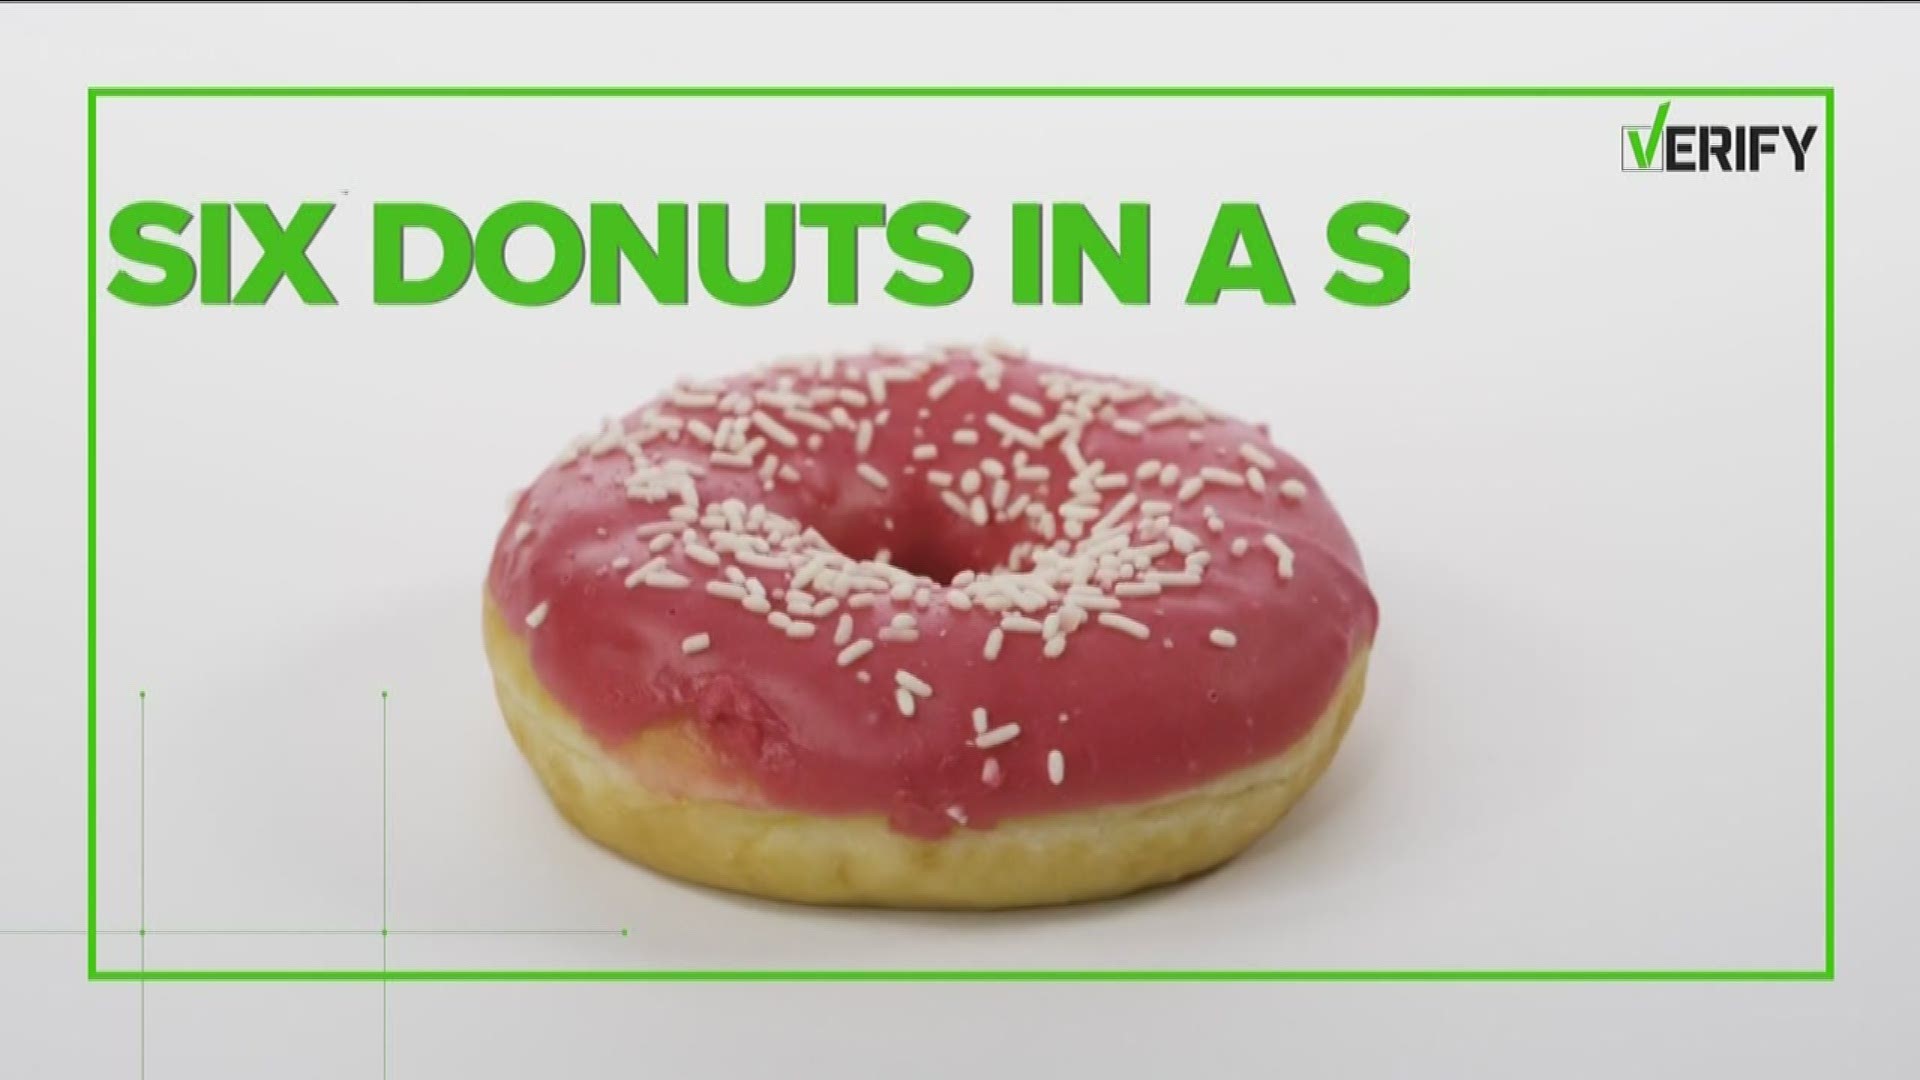 While a viral post accurately shows that six donuts and a 20 oz. Coke have the same amount of sugar, doctors explain comparing Cokes and donuts is a bit like comparing apples and oranges.